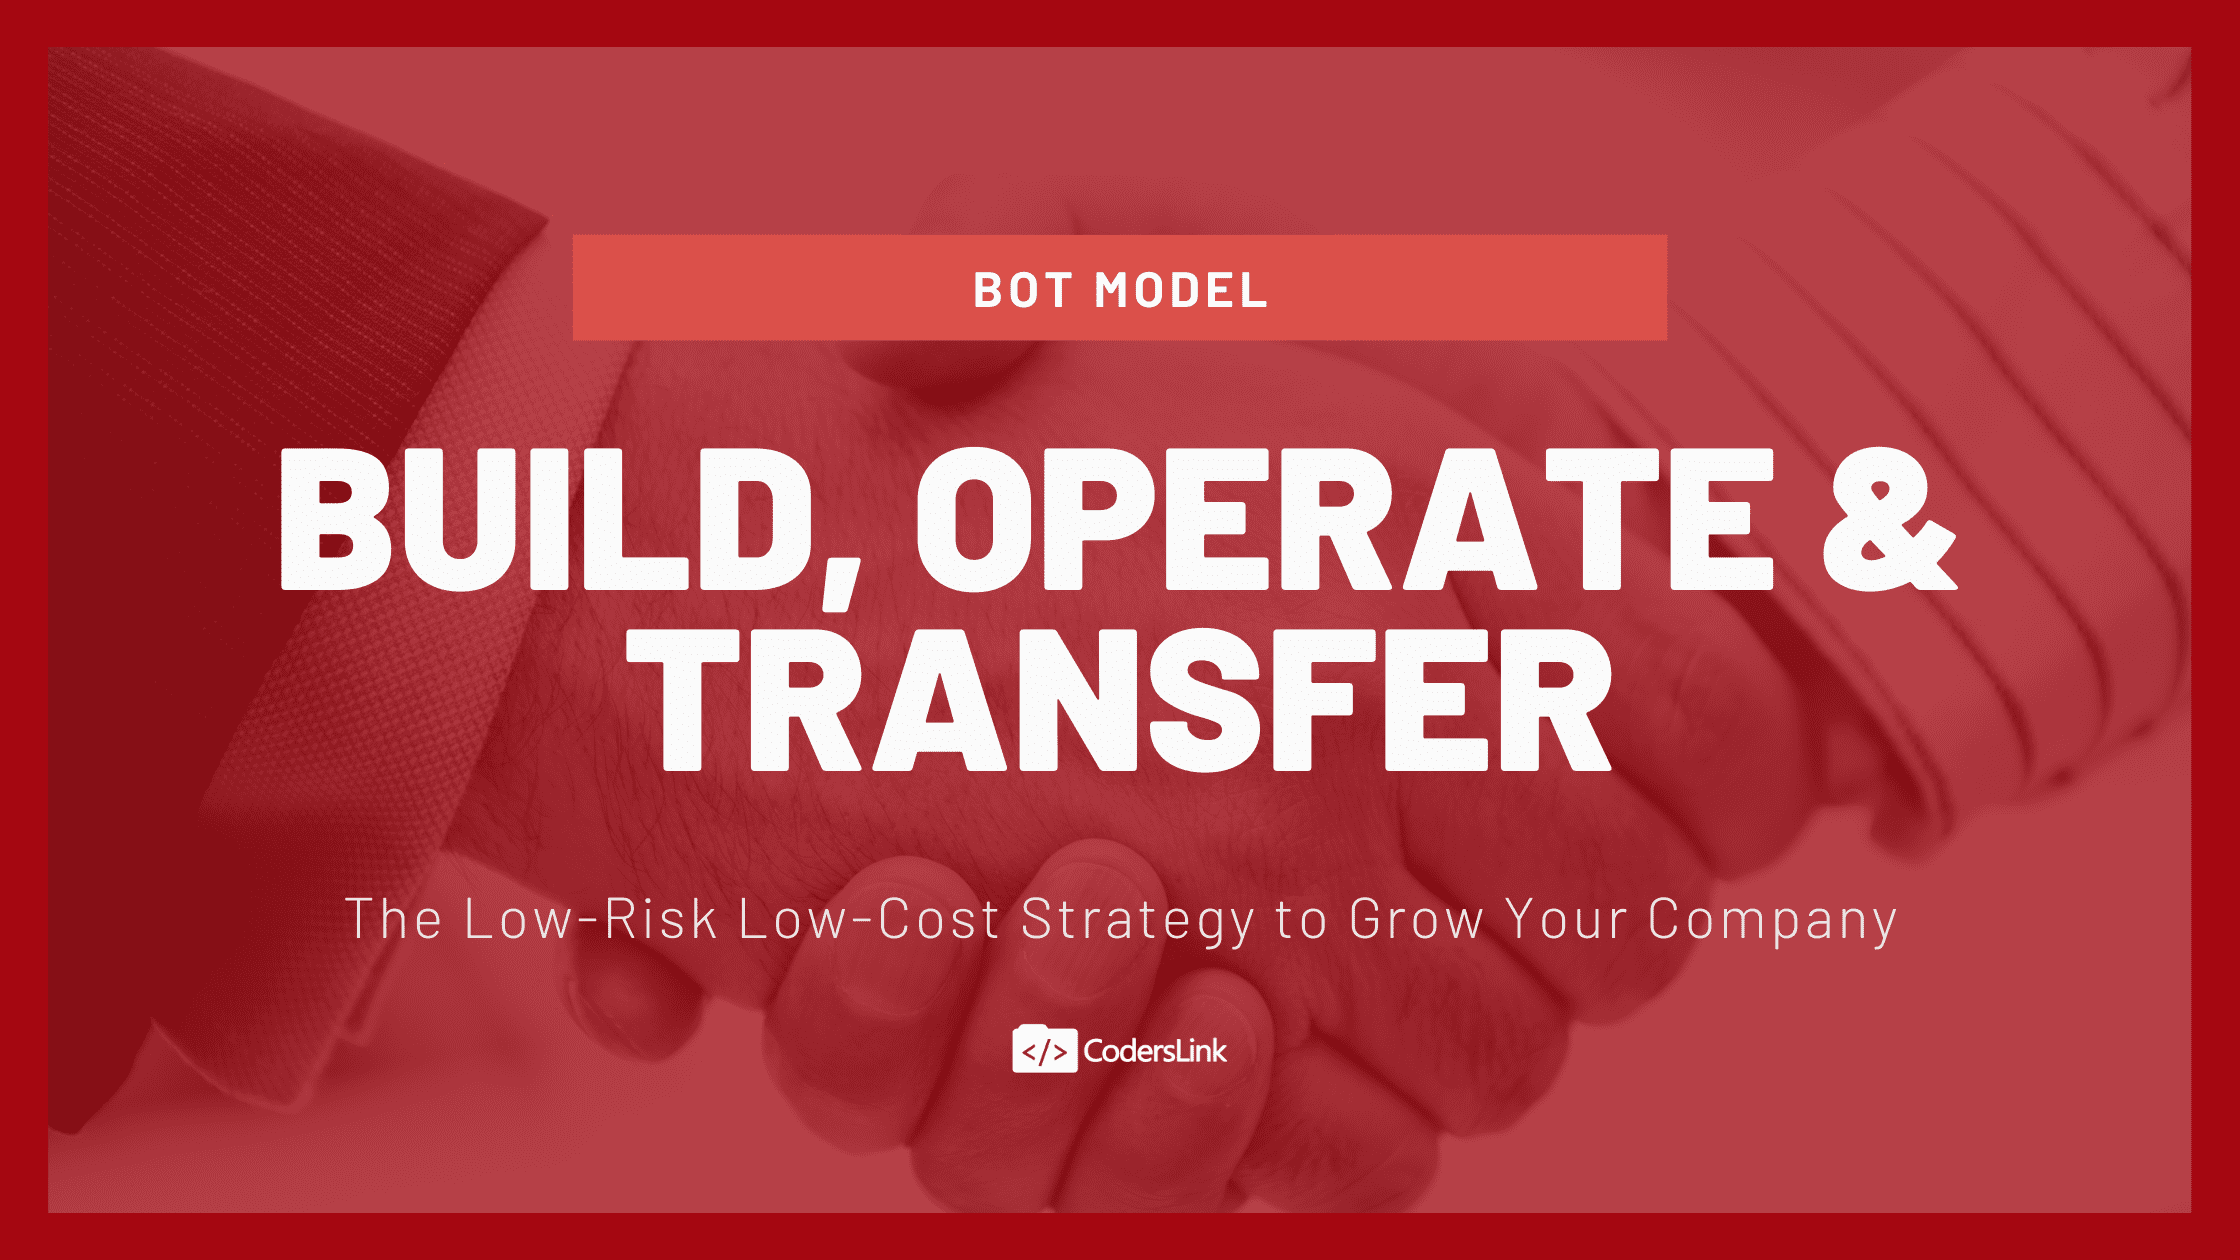 BOT outsourcing model